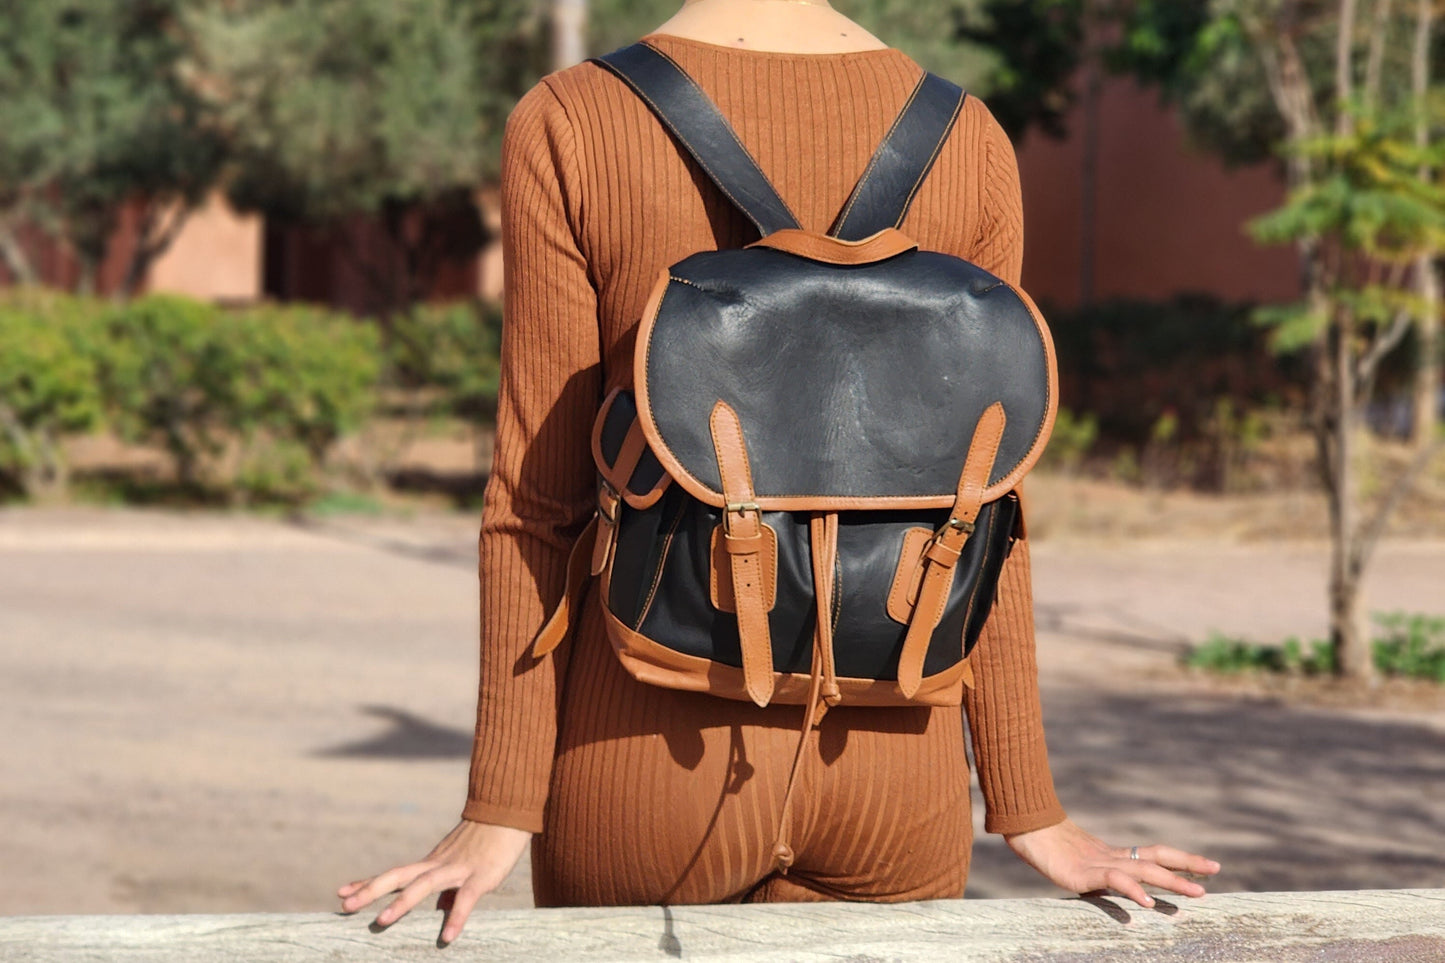 Sophisticated Two-Tone Leather Backpack in Brown and Black